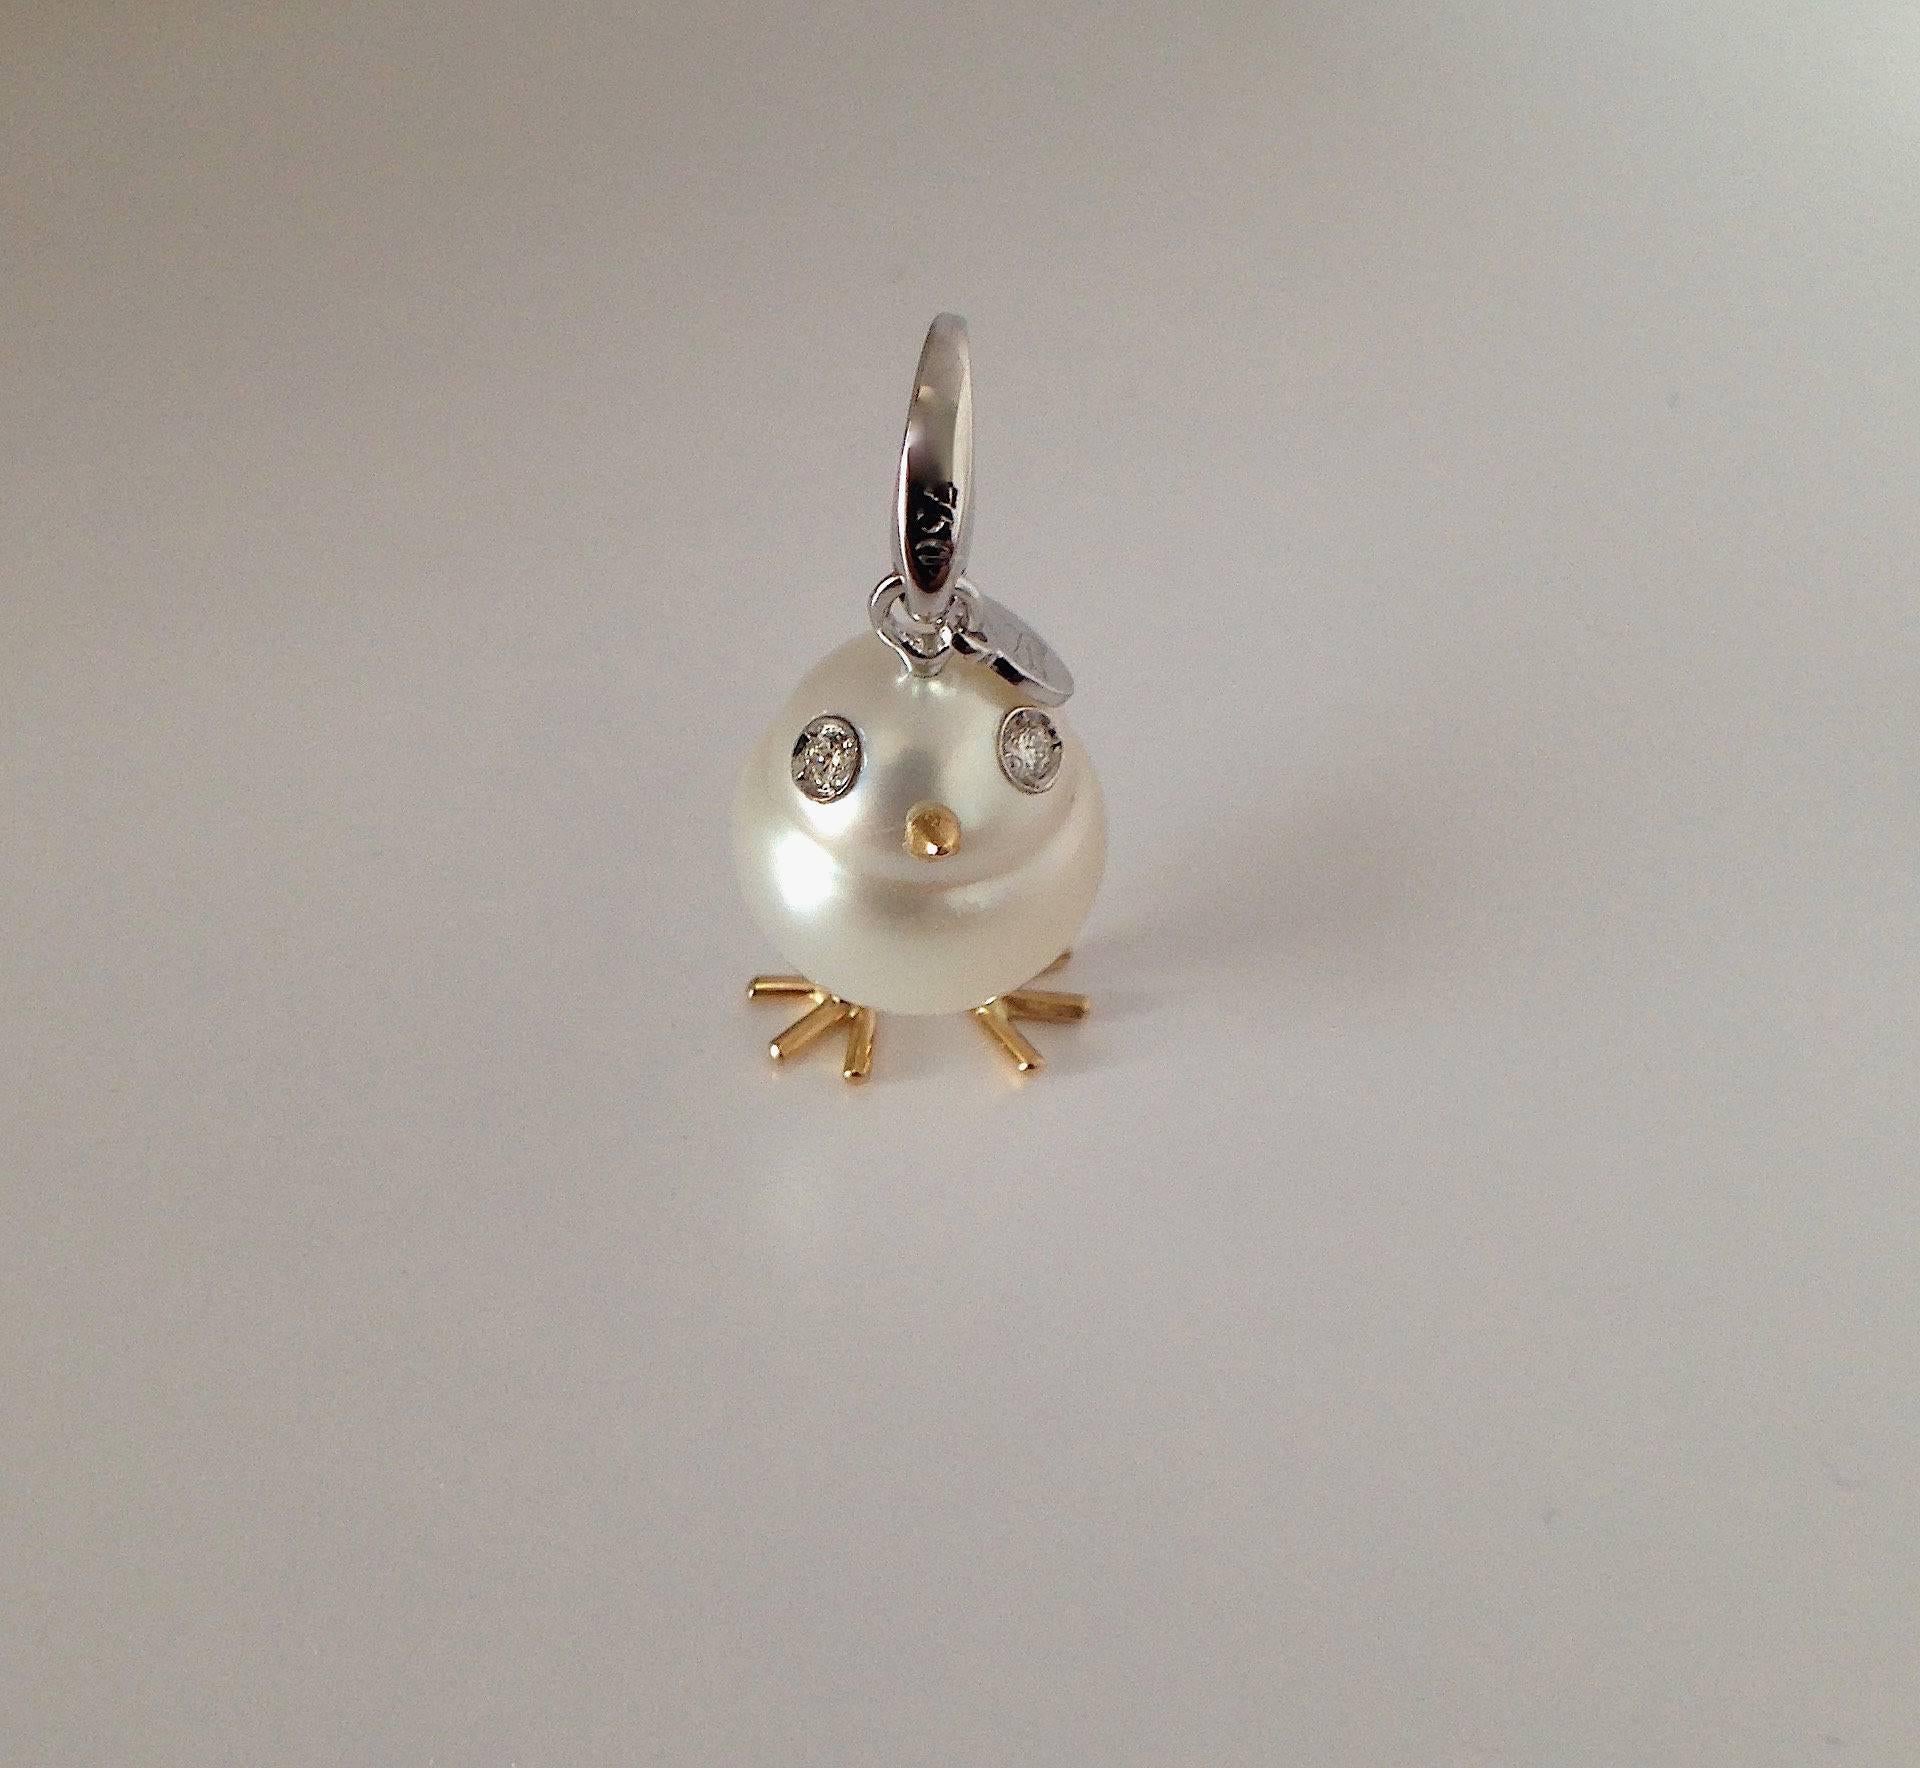 Women's Baby Chick Australian Pearl White Diamond Yellow Gold Pendant/Necklace or Charm